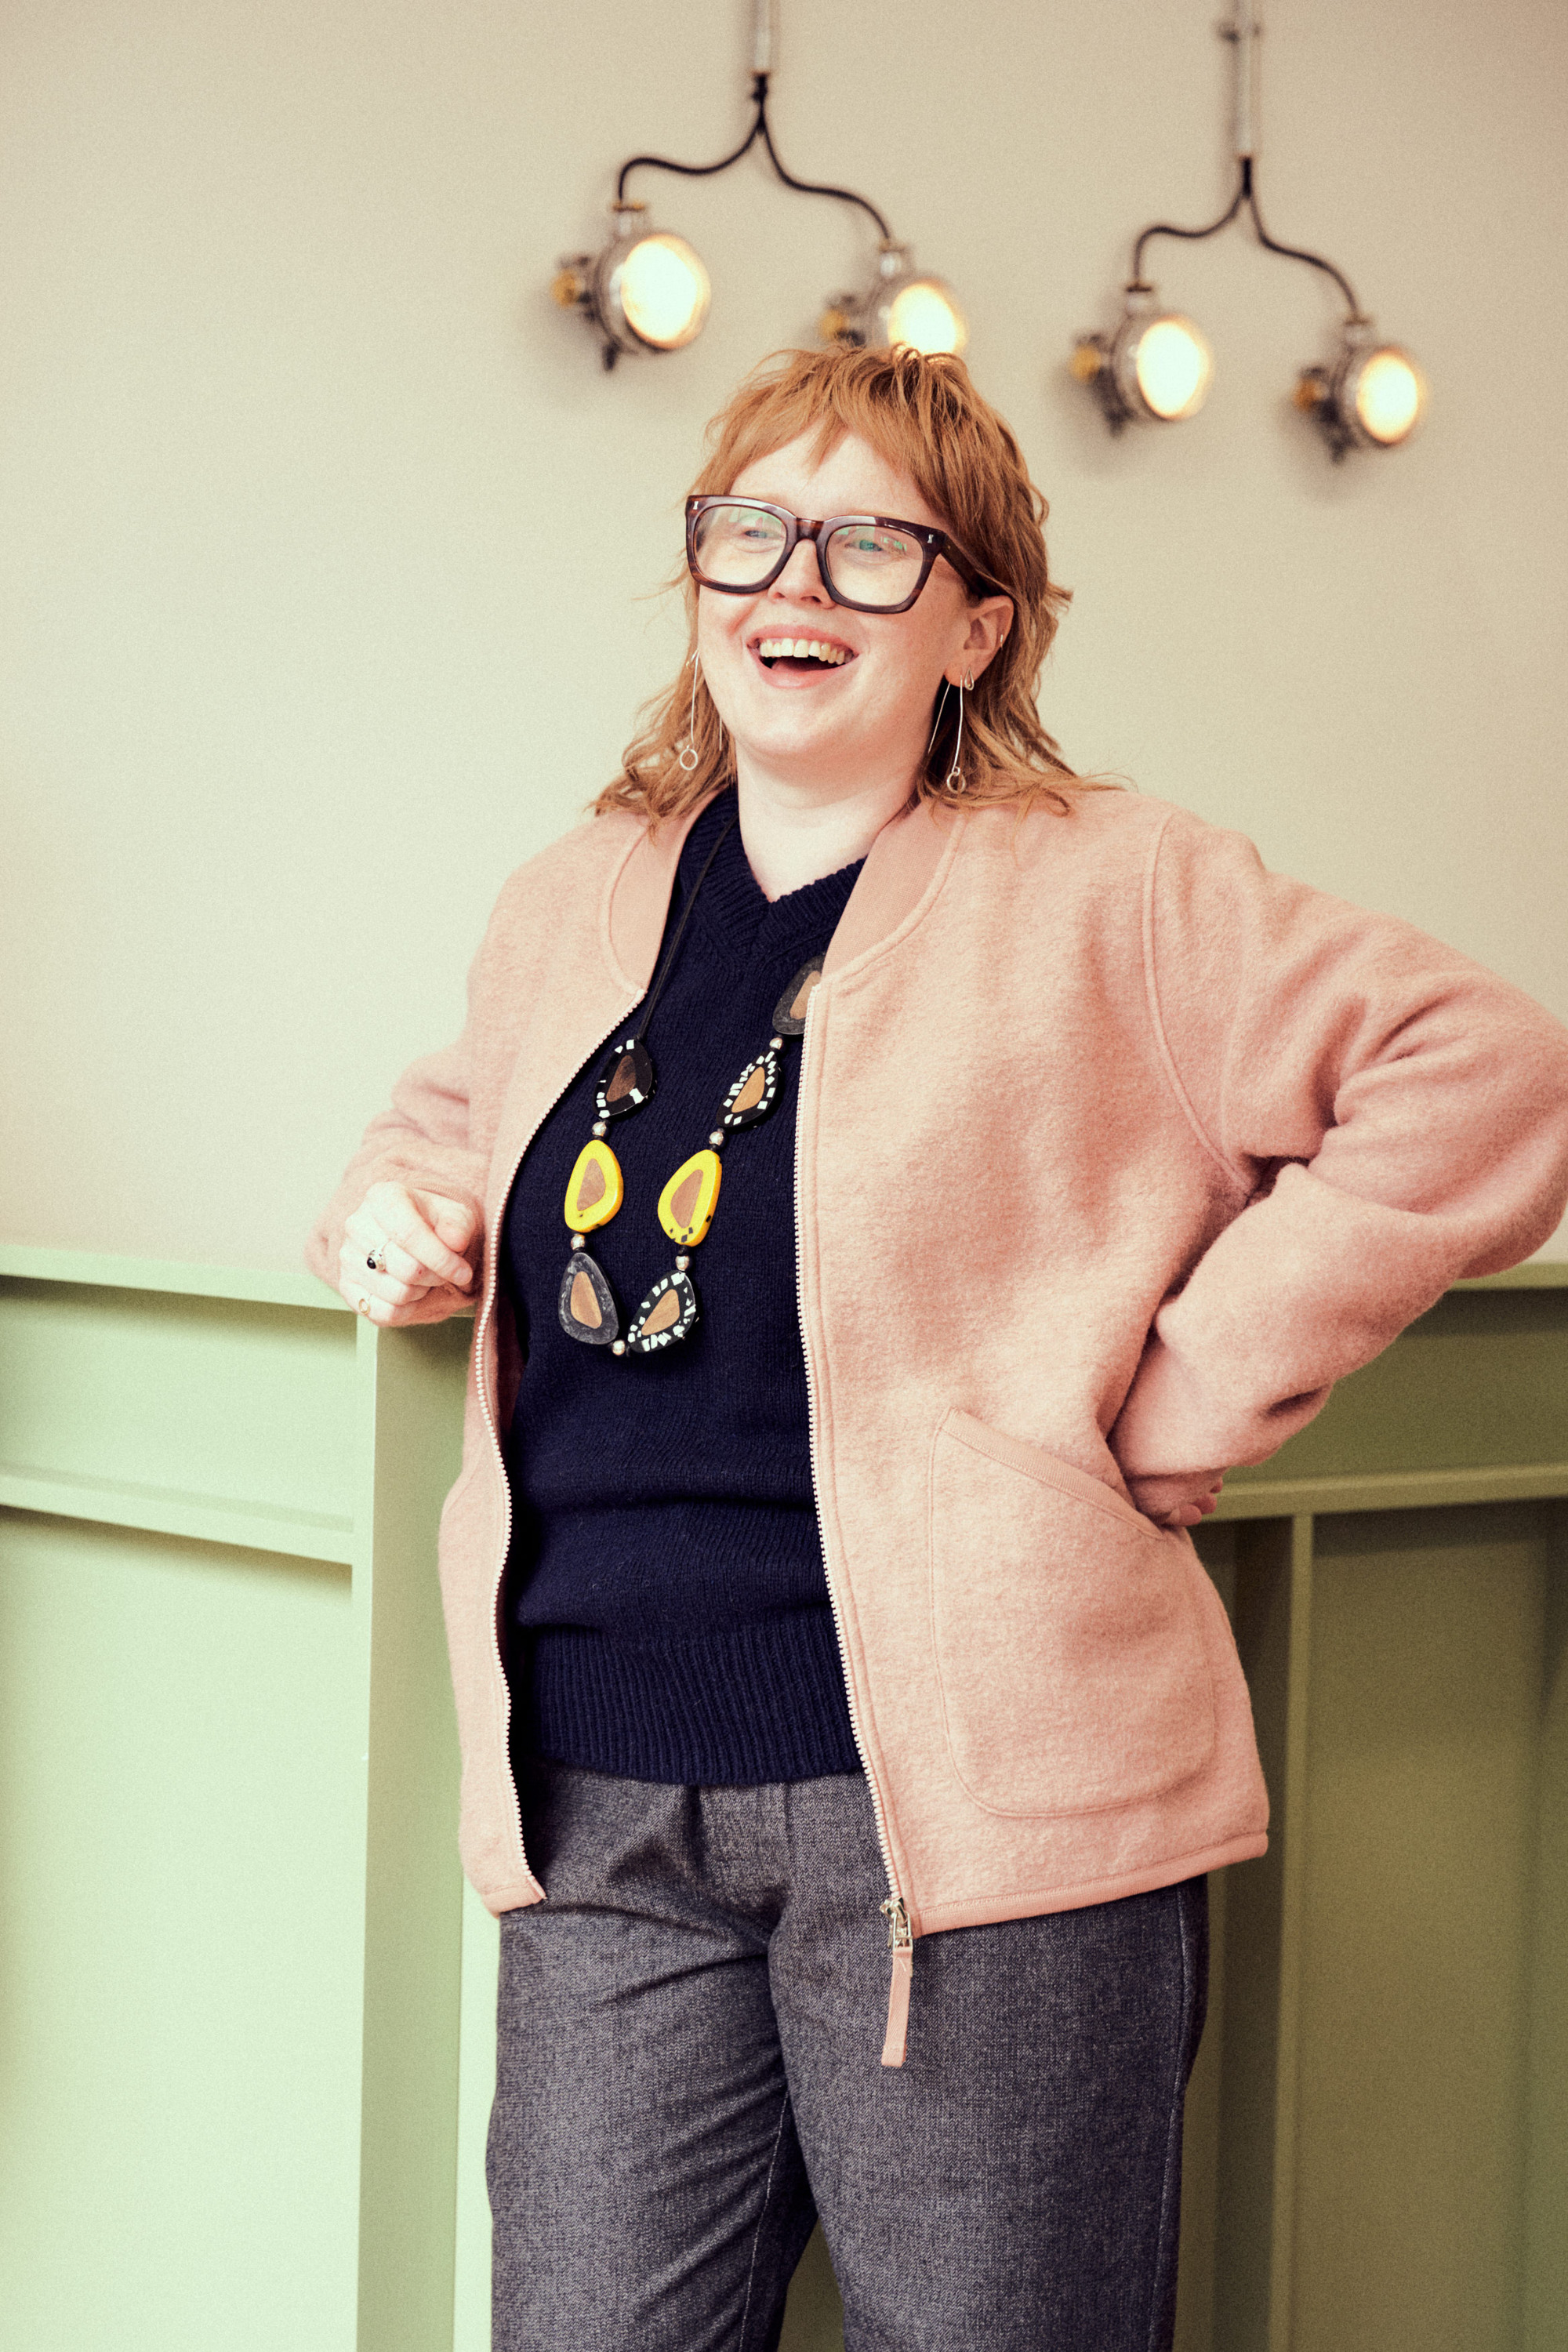 Frankie from our Derby Road Store laughing and looking great in our Zip Bomber Jacket in Wool Fleece.